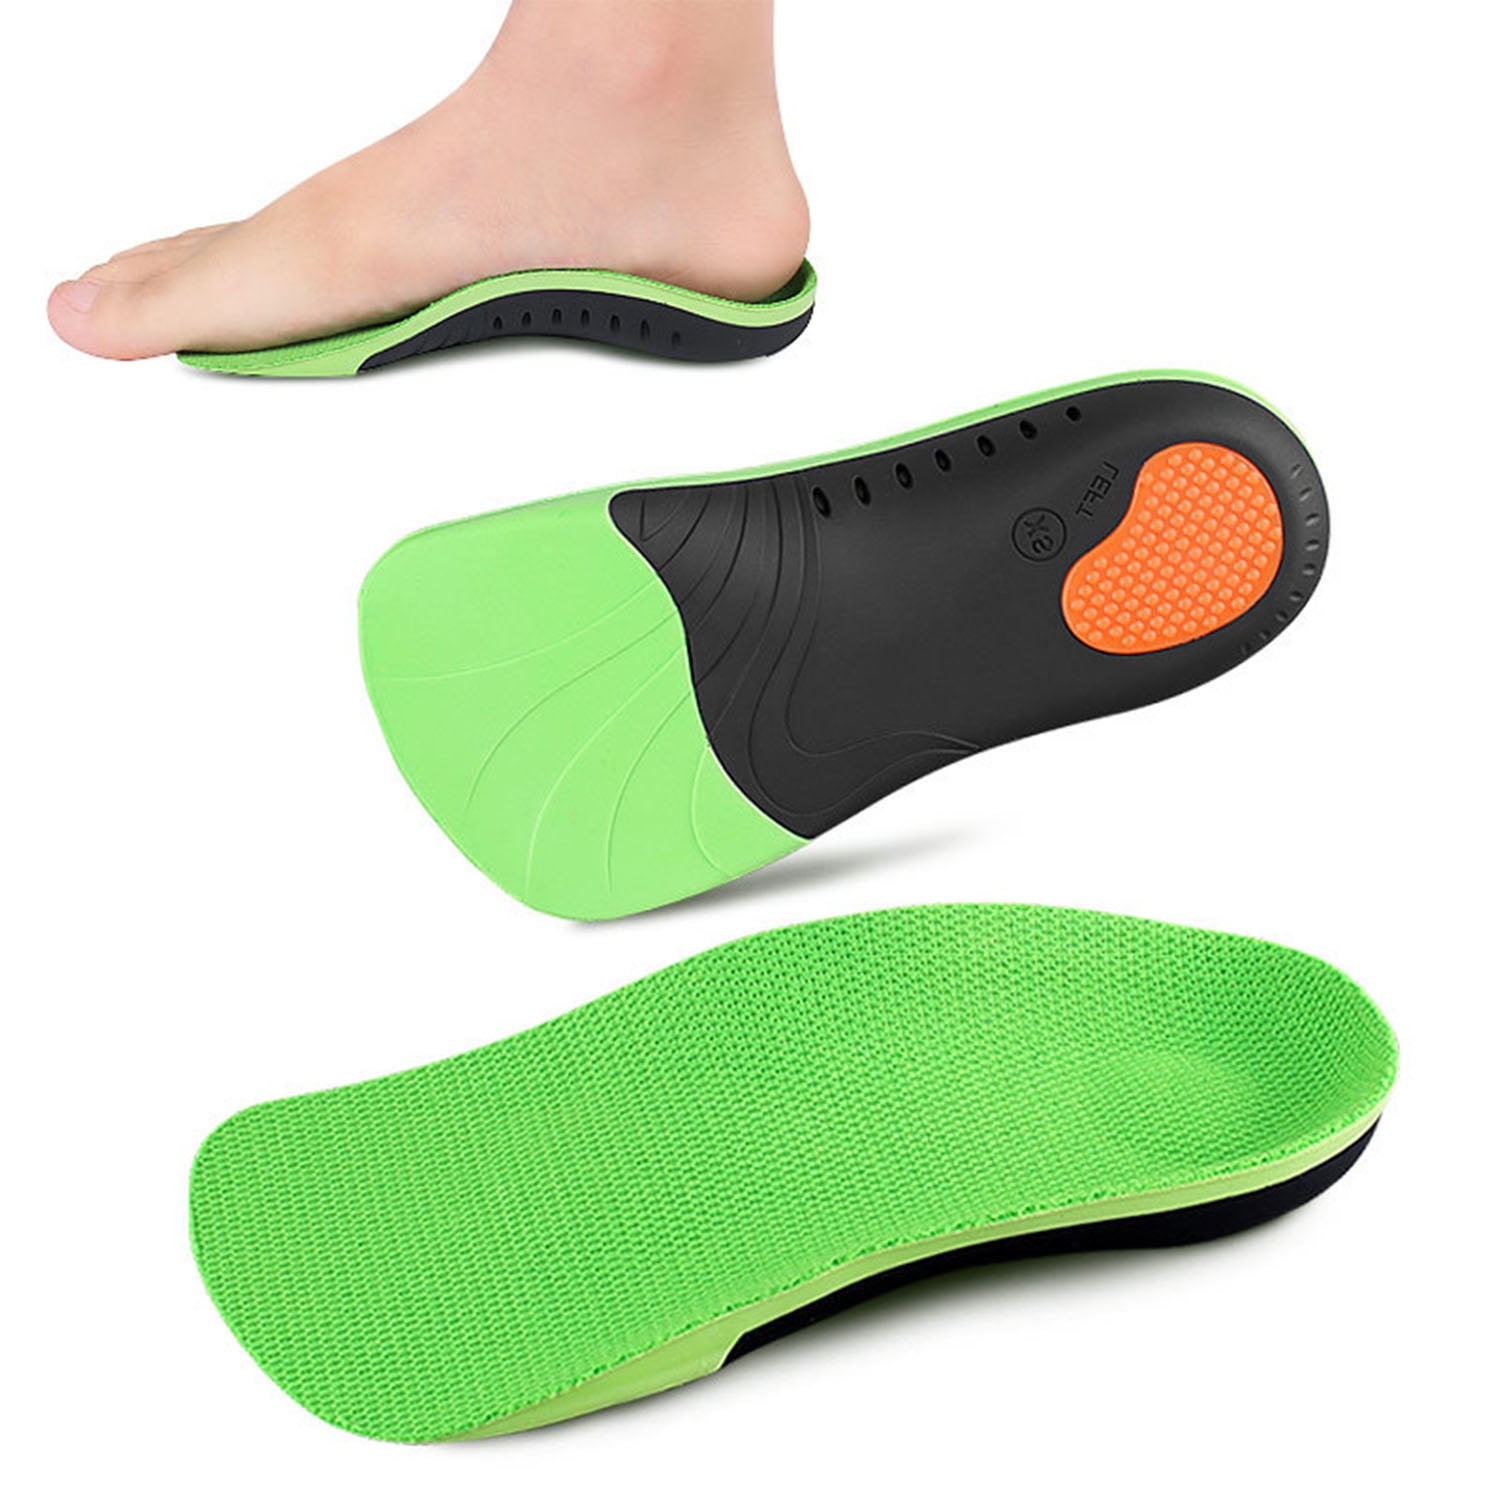 Orthotic shoe Insoles Arch Support Heel Plantar Fasciitis Orthopedic inserts 3/4 